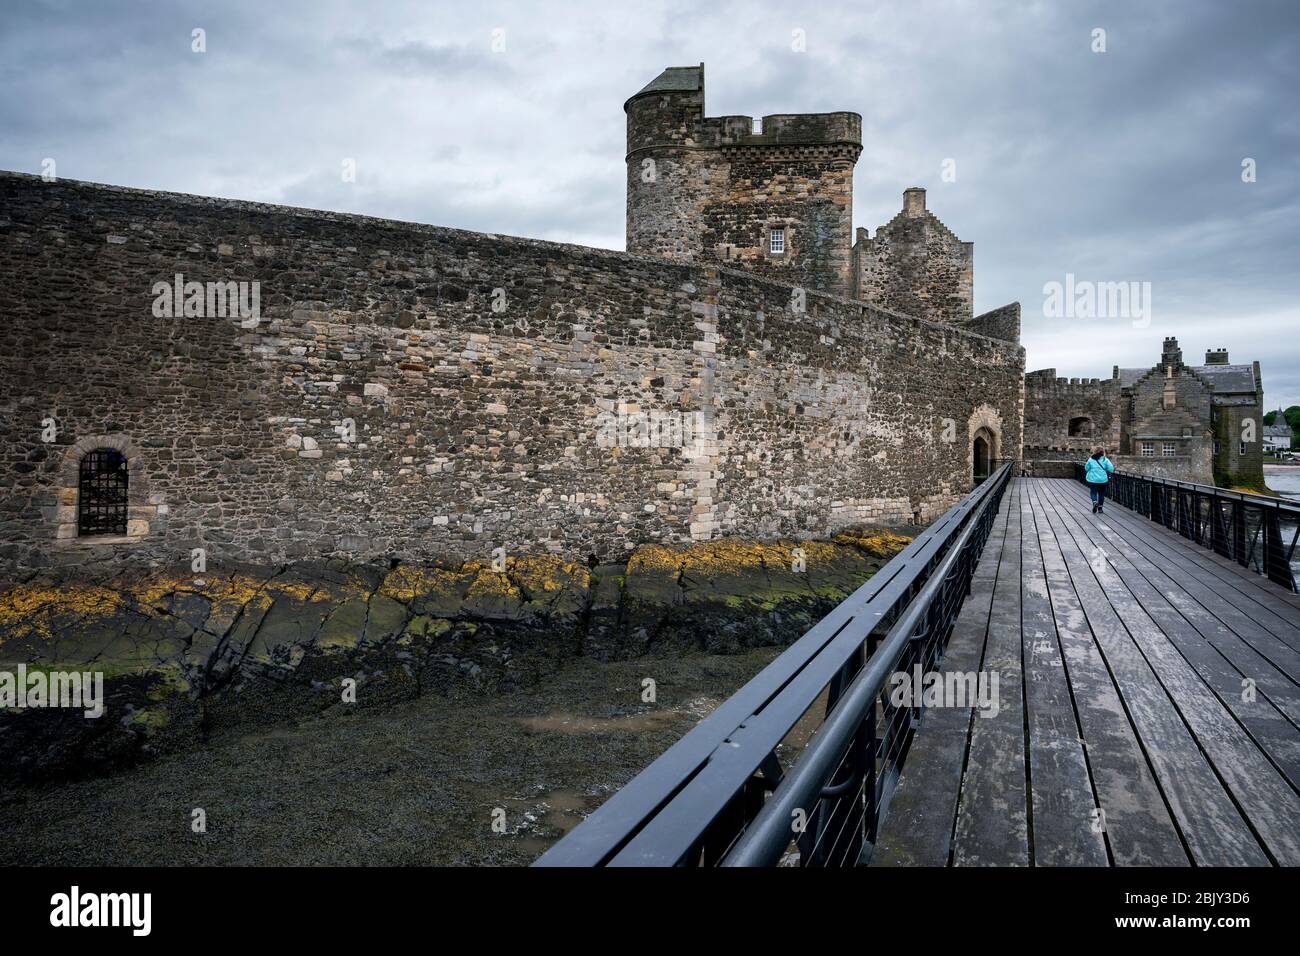 Blackness Castle built by Sir George Crichton in the 1440s, sits on the edge of the sea on the Firth of Forth. This fortress resembles a stone ship. Stock Photo